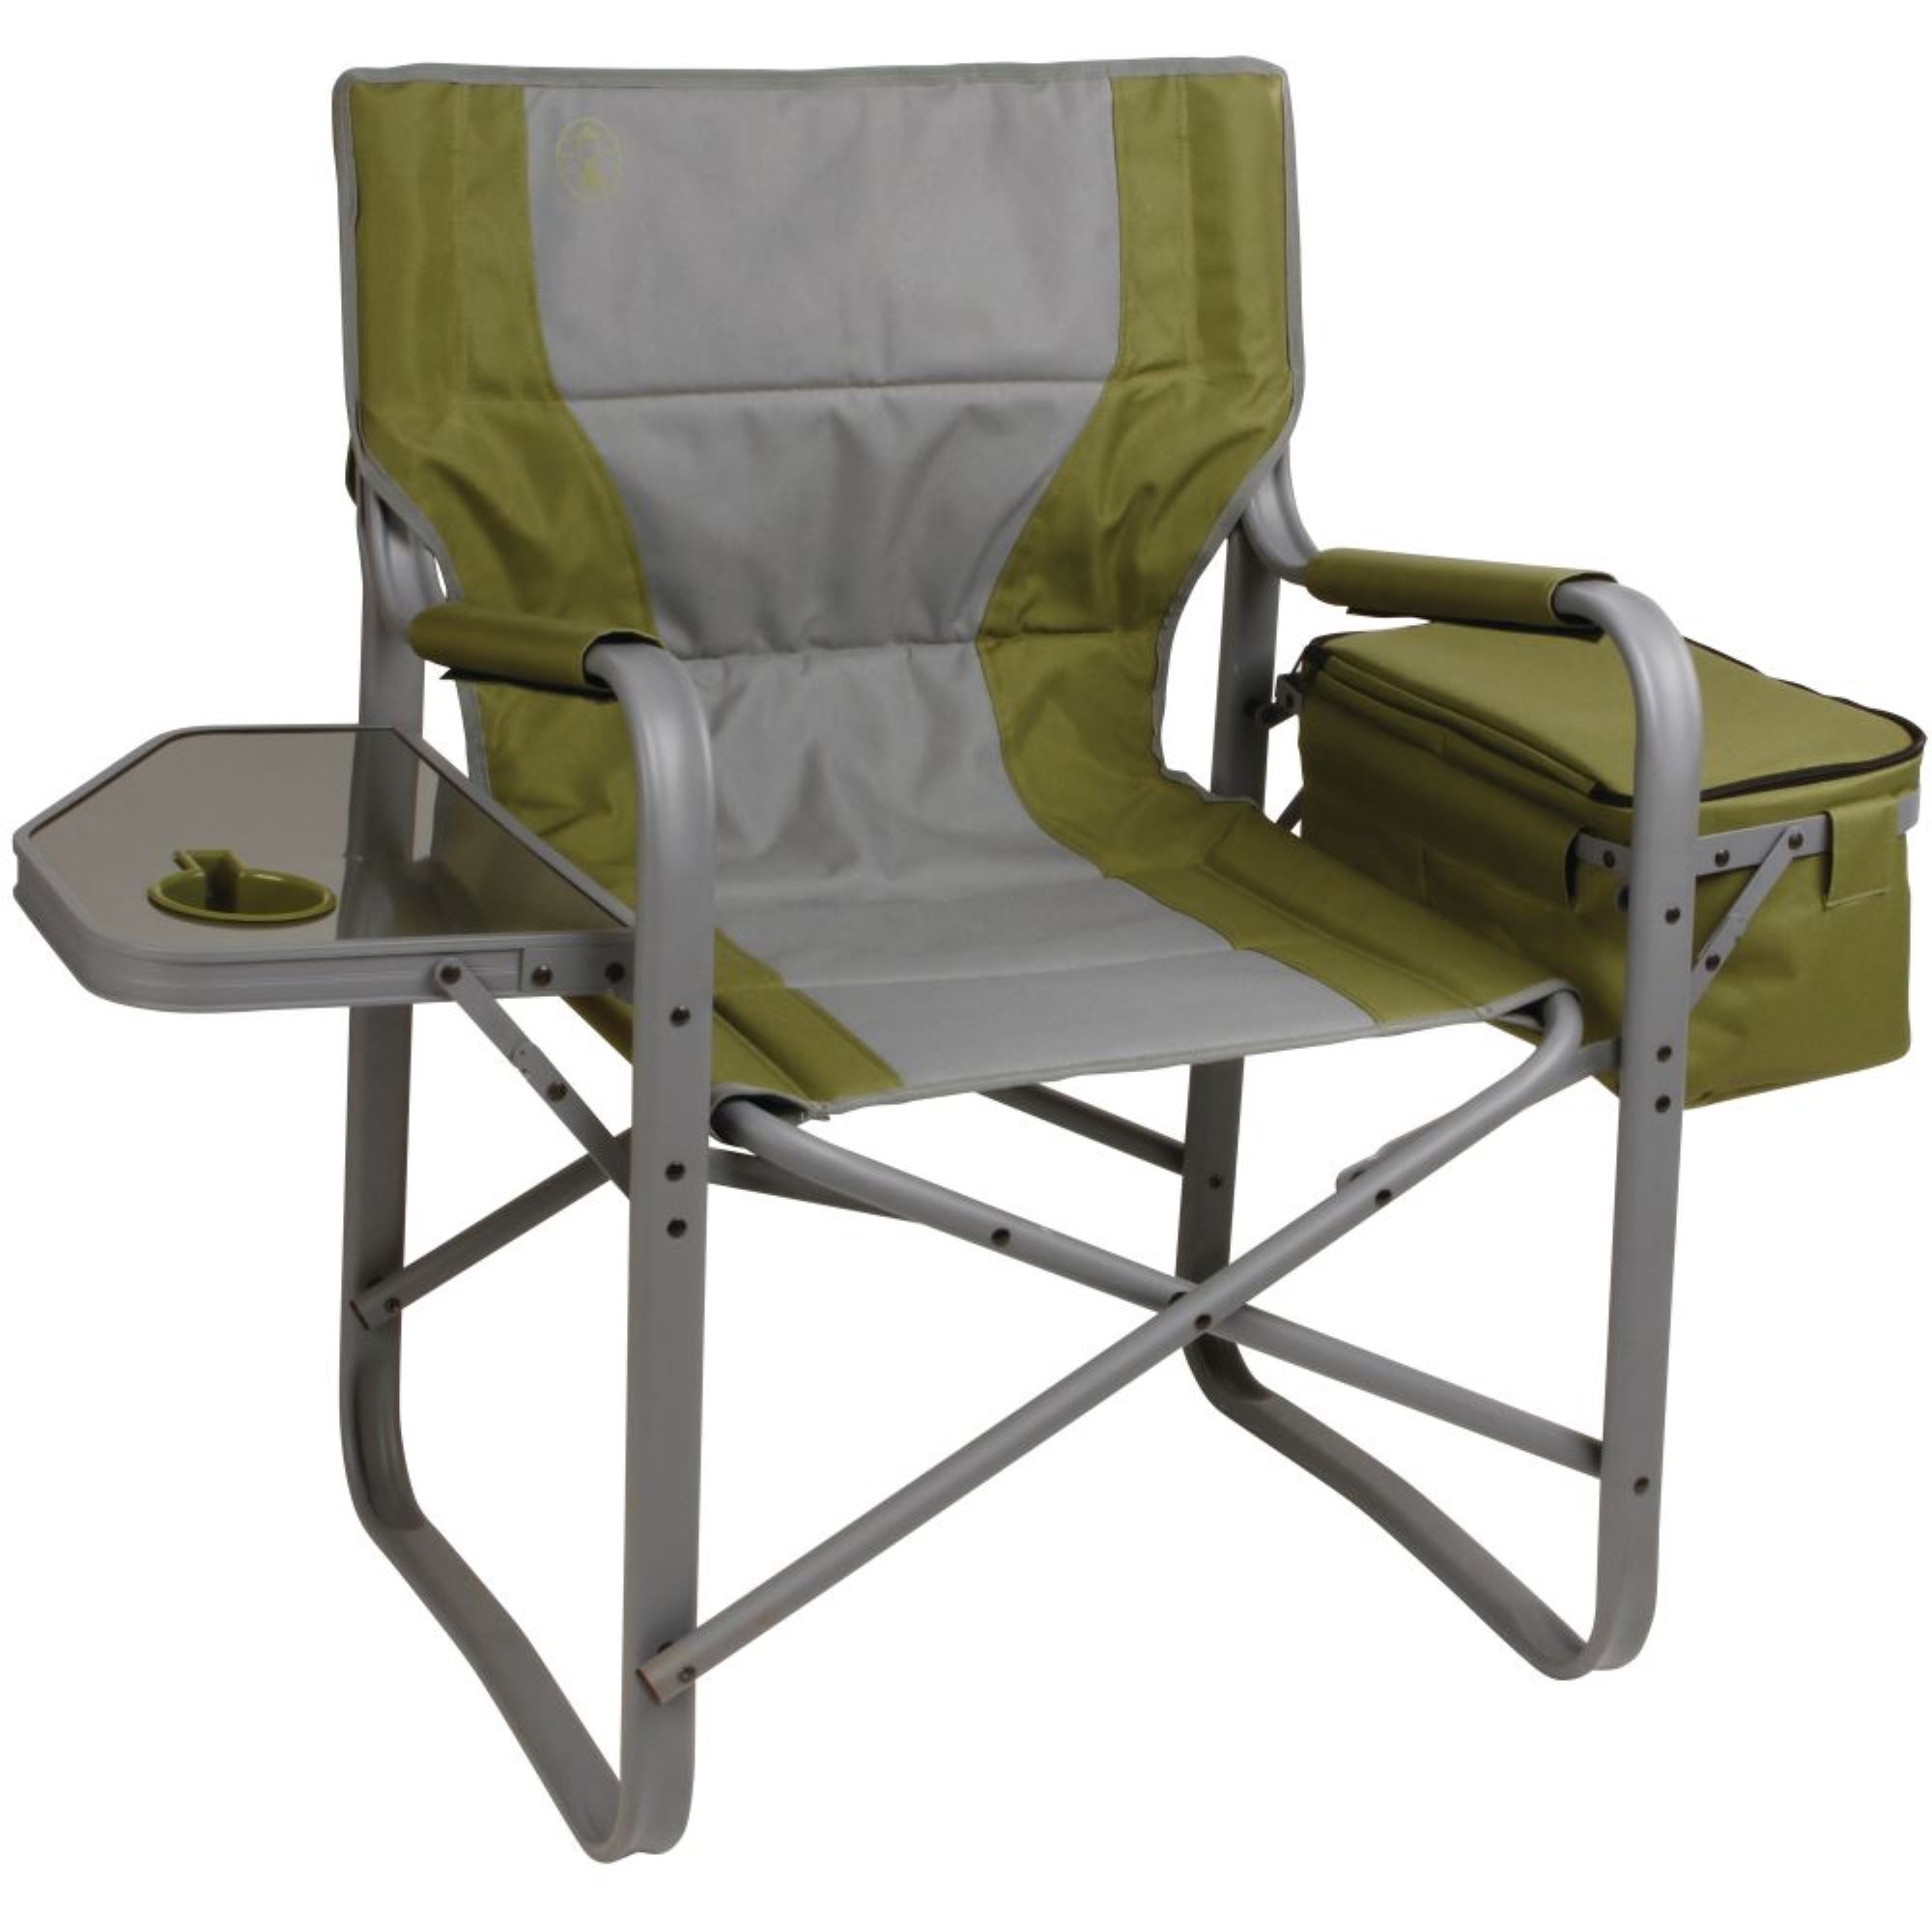 Directors Camp Chair XL with Cooler